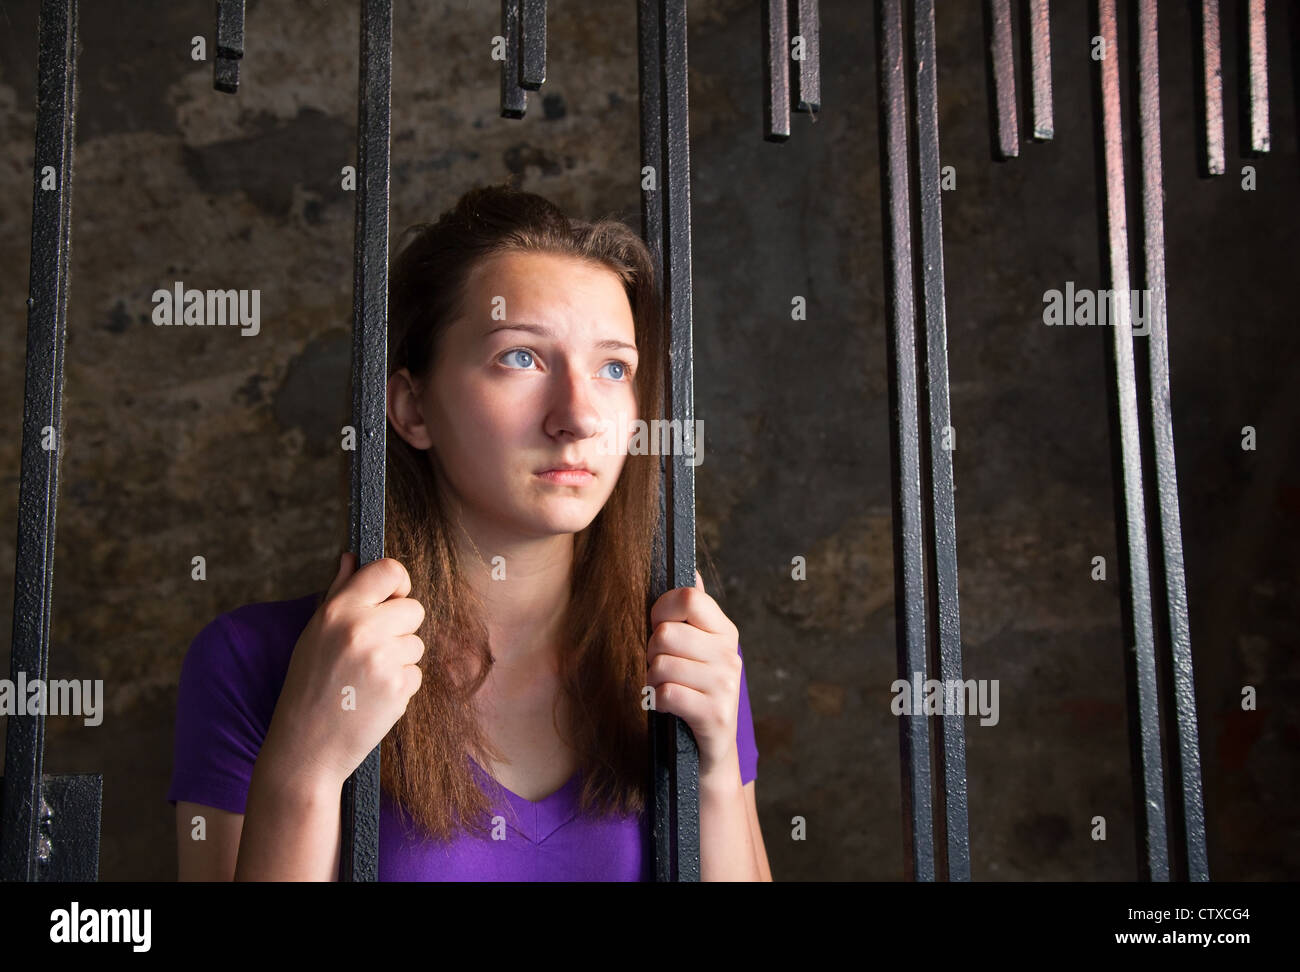 Young woman looking from behind the bars Stock Photo